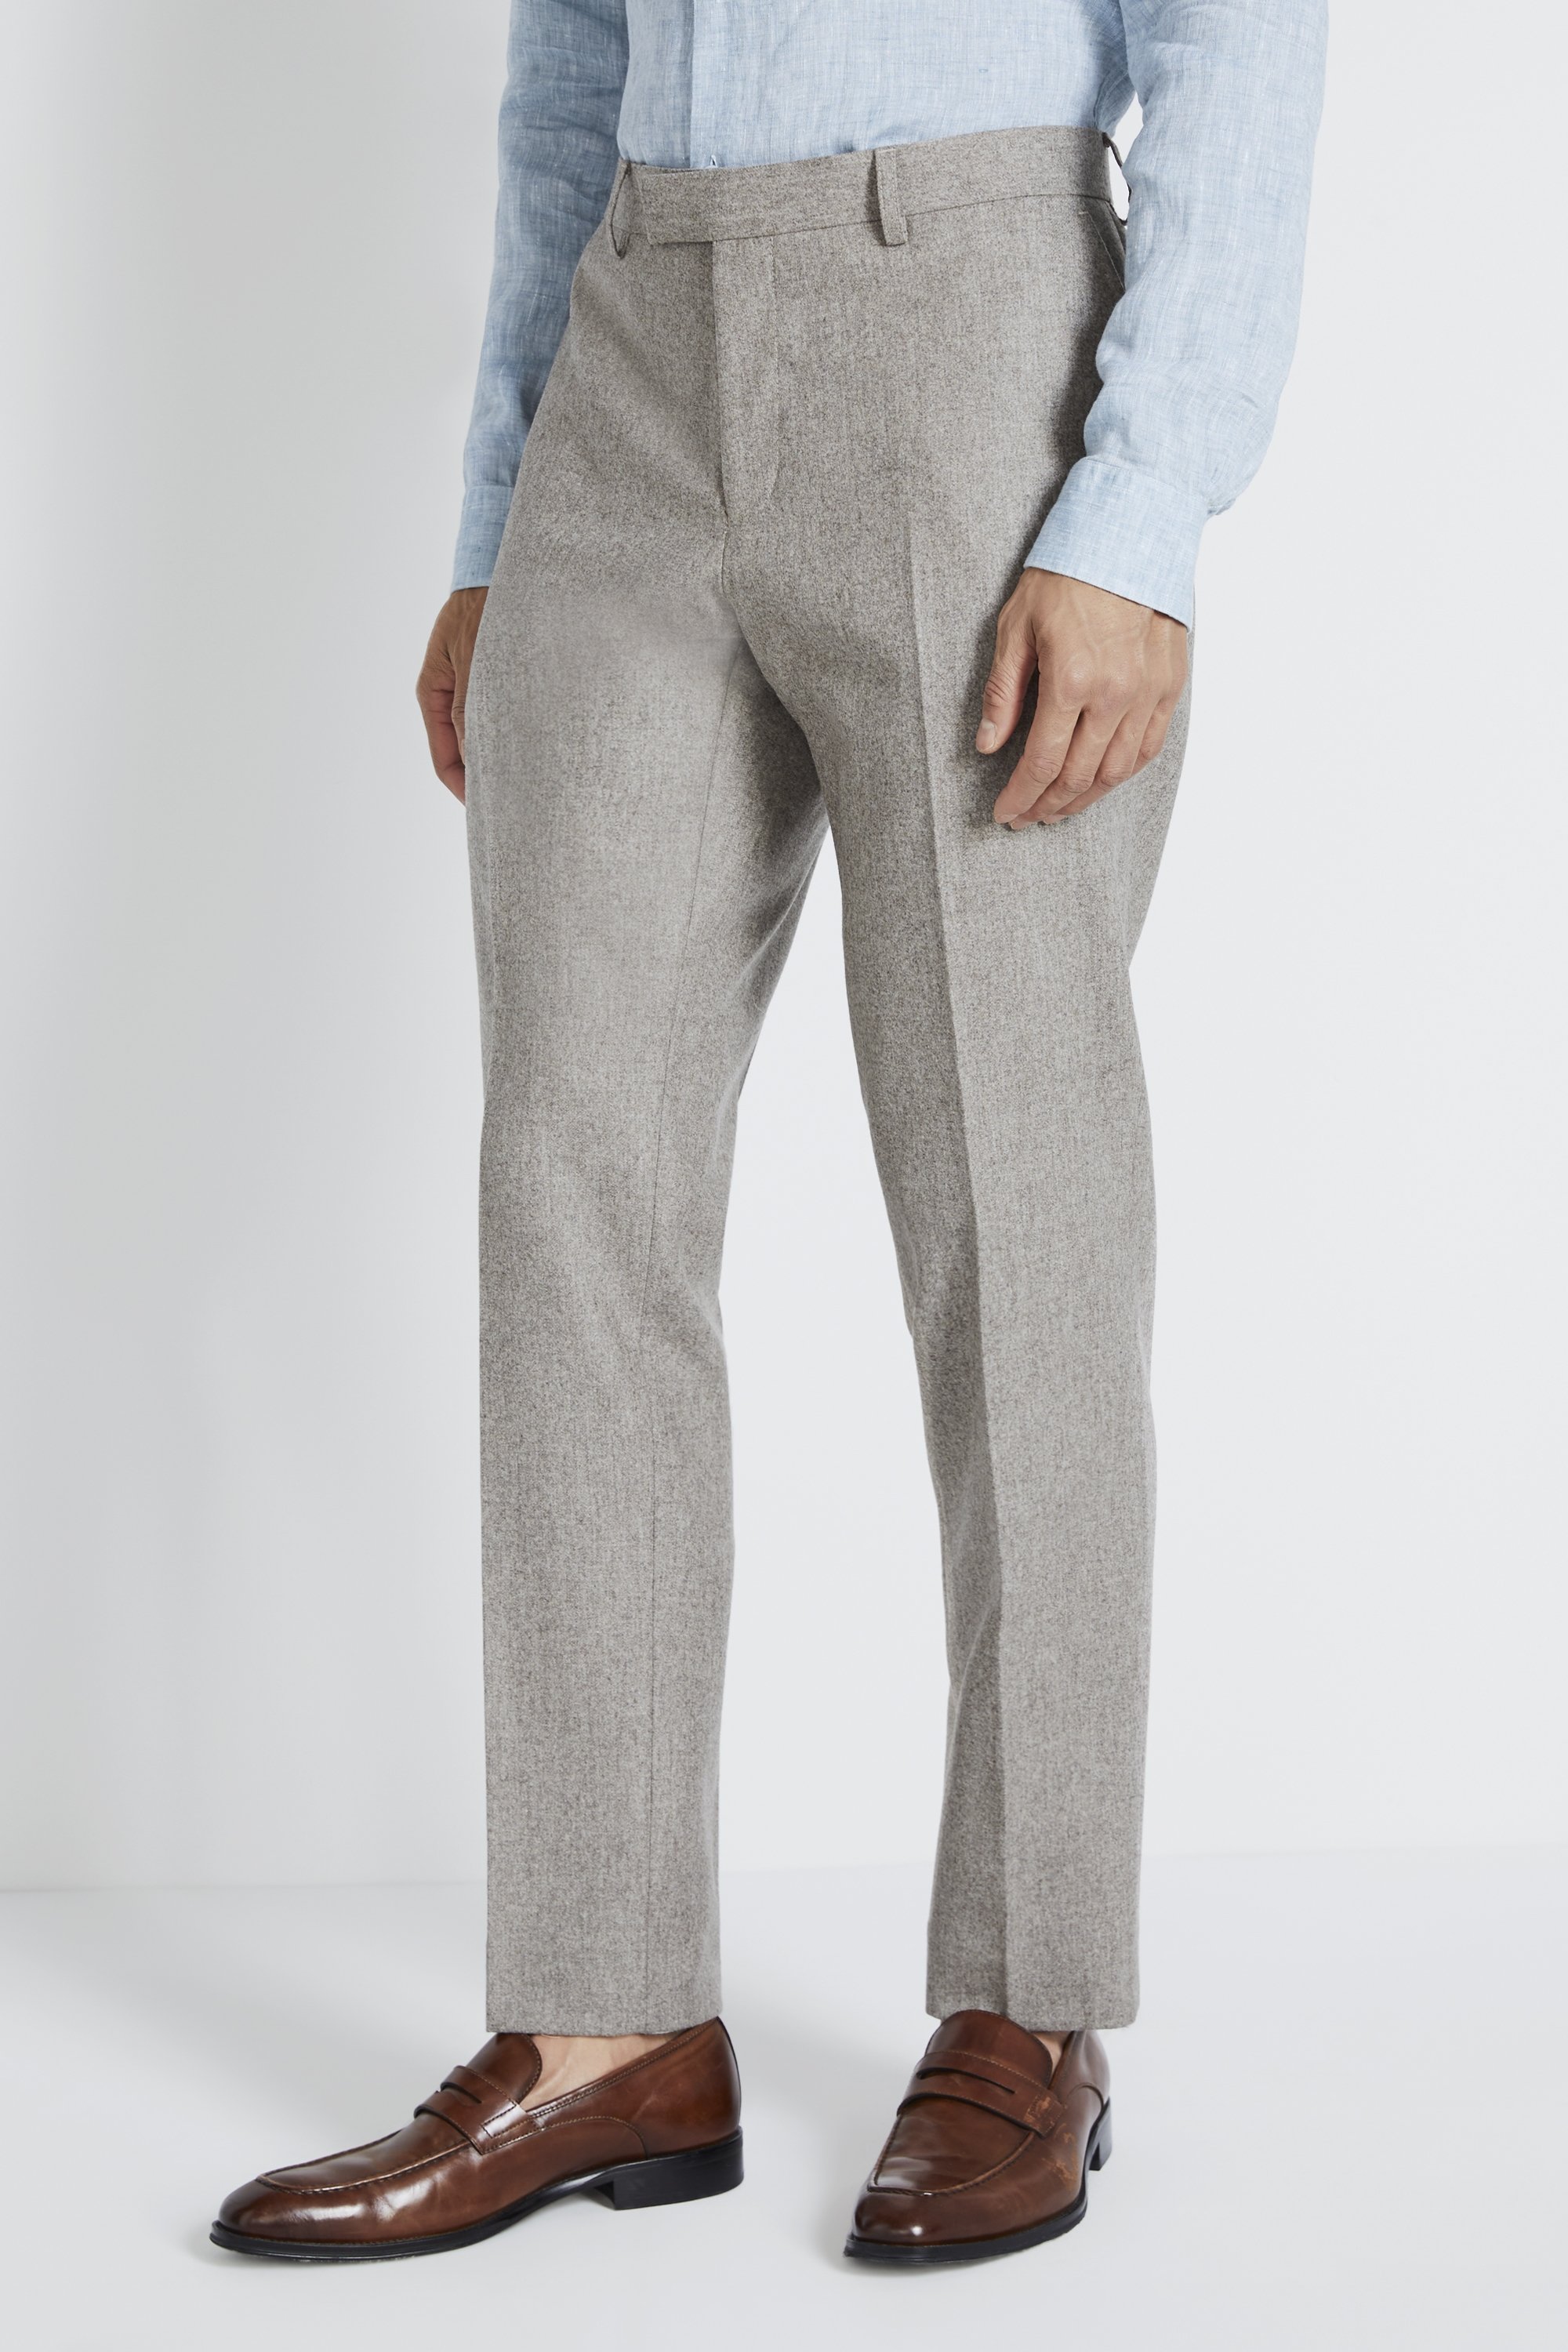 Caine Grey Check Flannel Trousers  Kit Blake